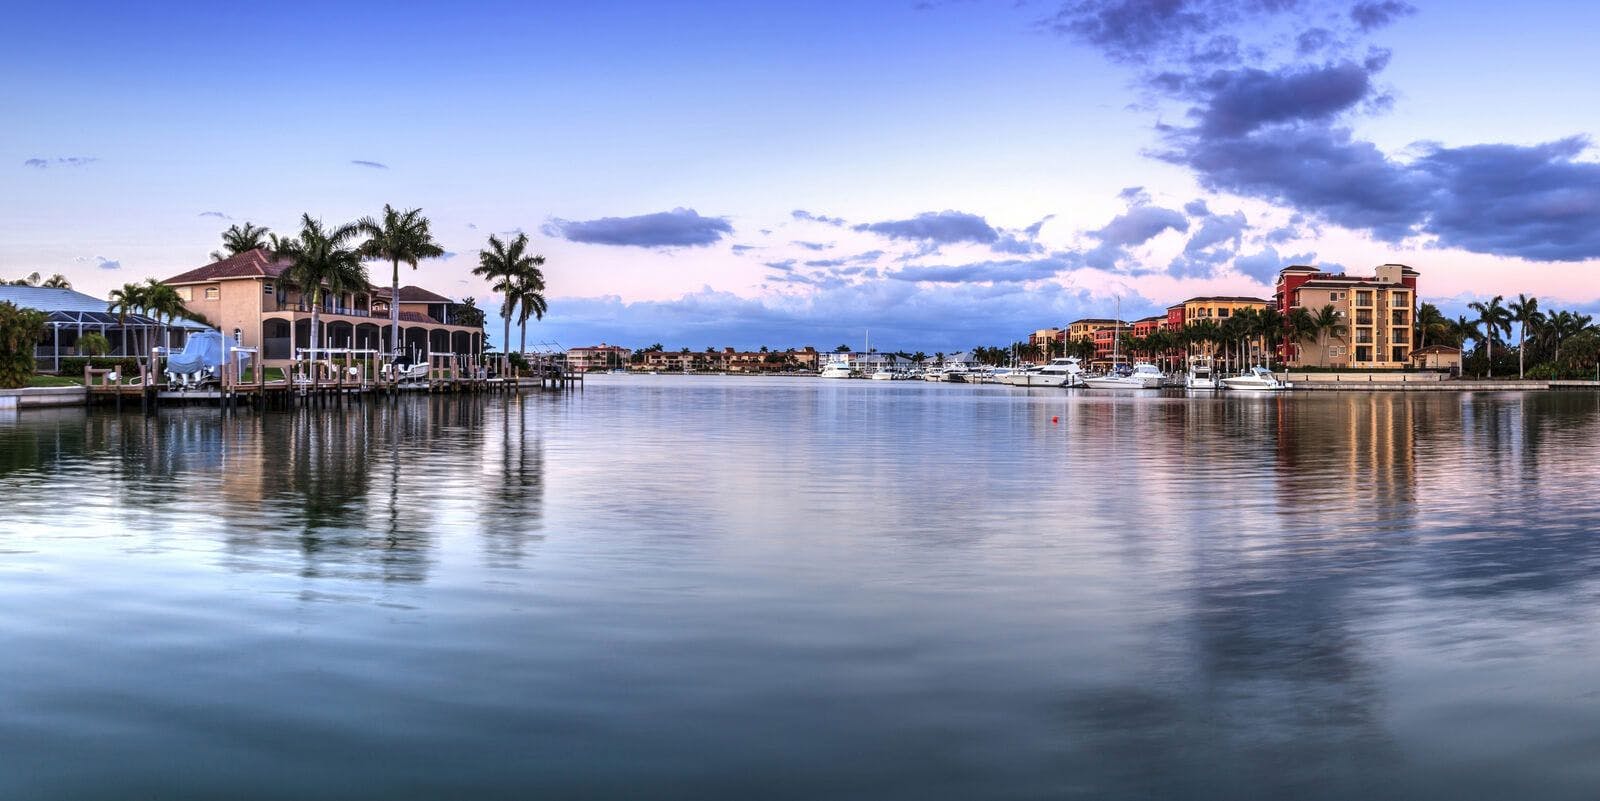 Homes on the waterfront in Marco Island